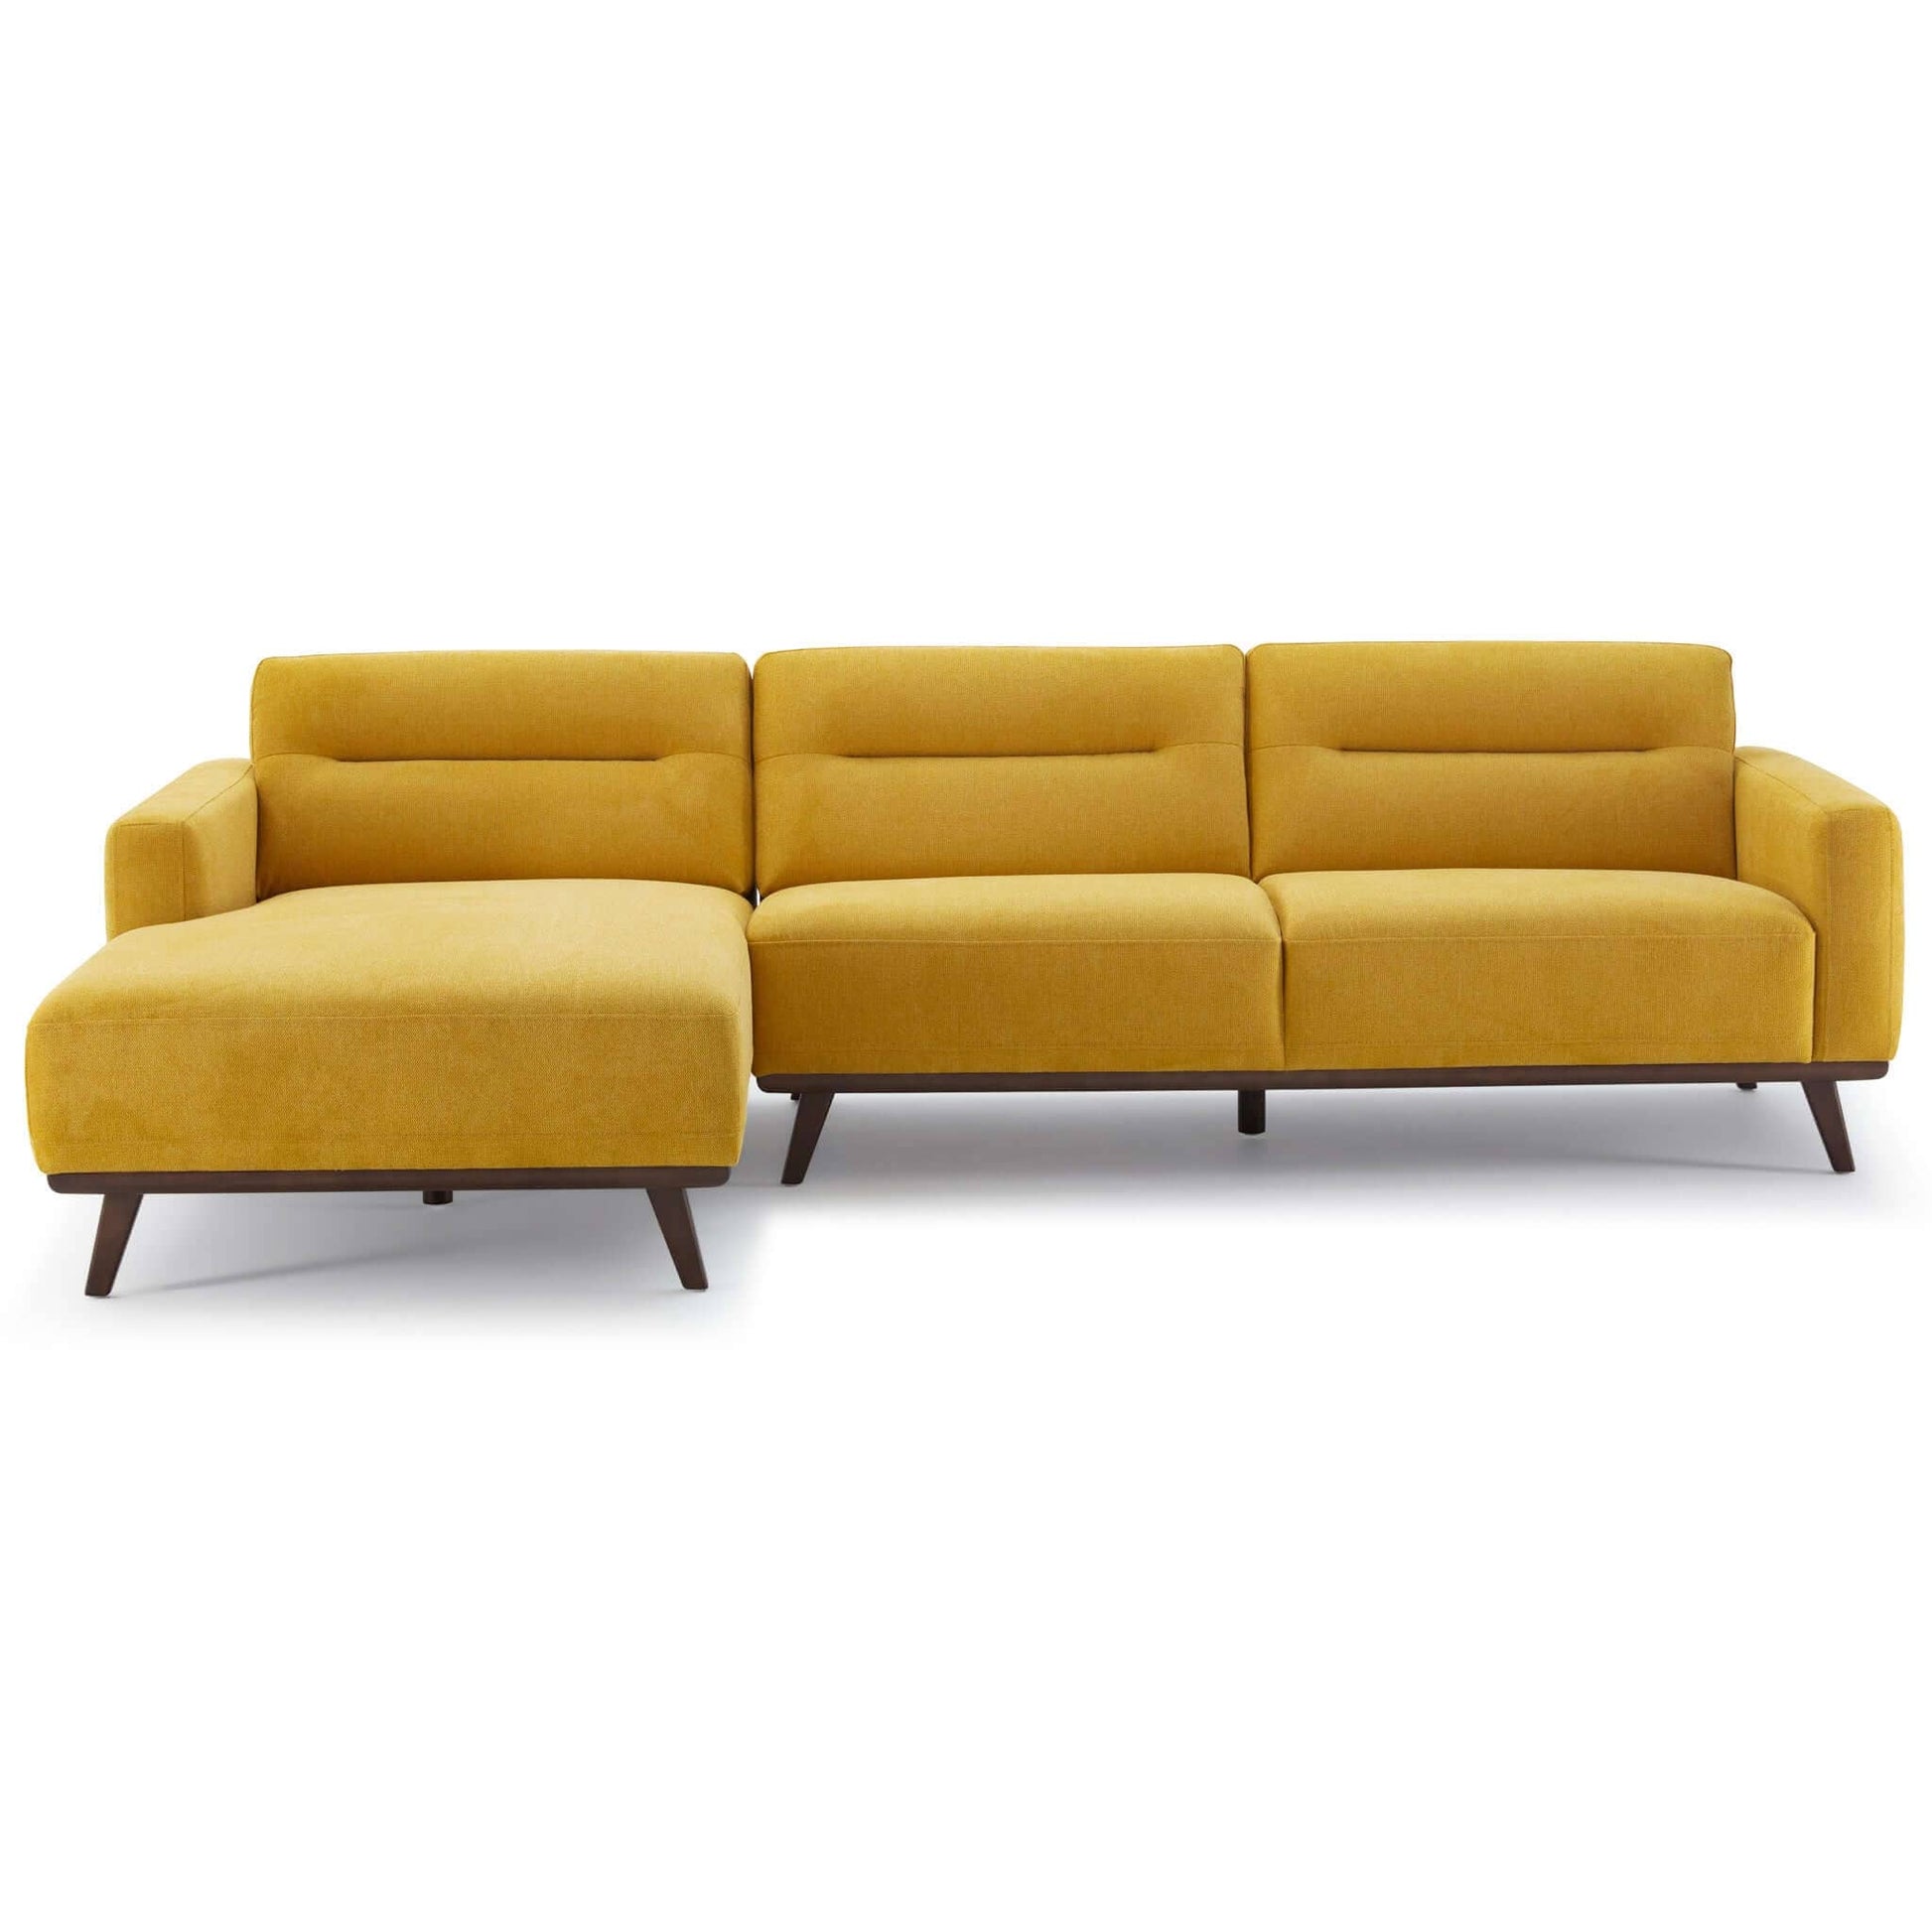 Ashcroft Furniture Co Sectional Sofas Left-Sectional Ella L-Shaped Dark Yellow Linen Left Sectional Couch